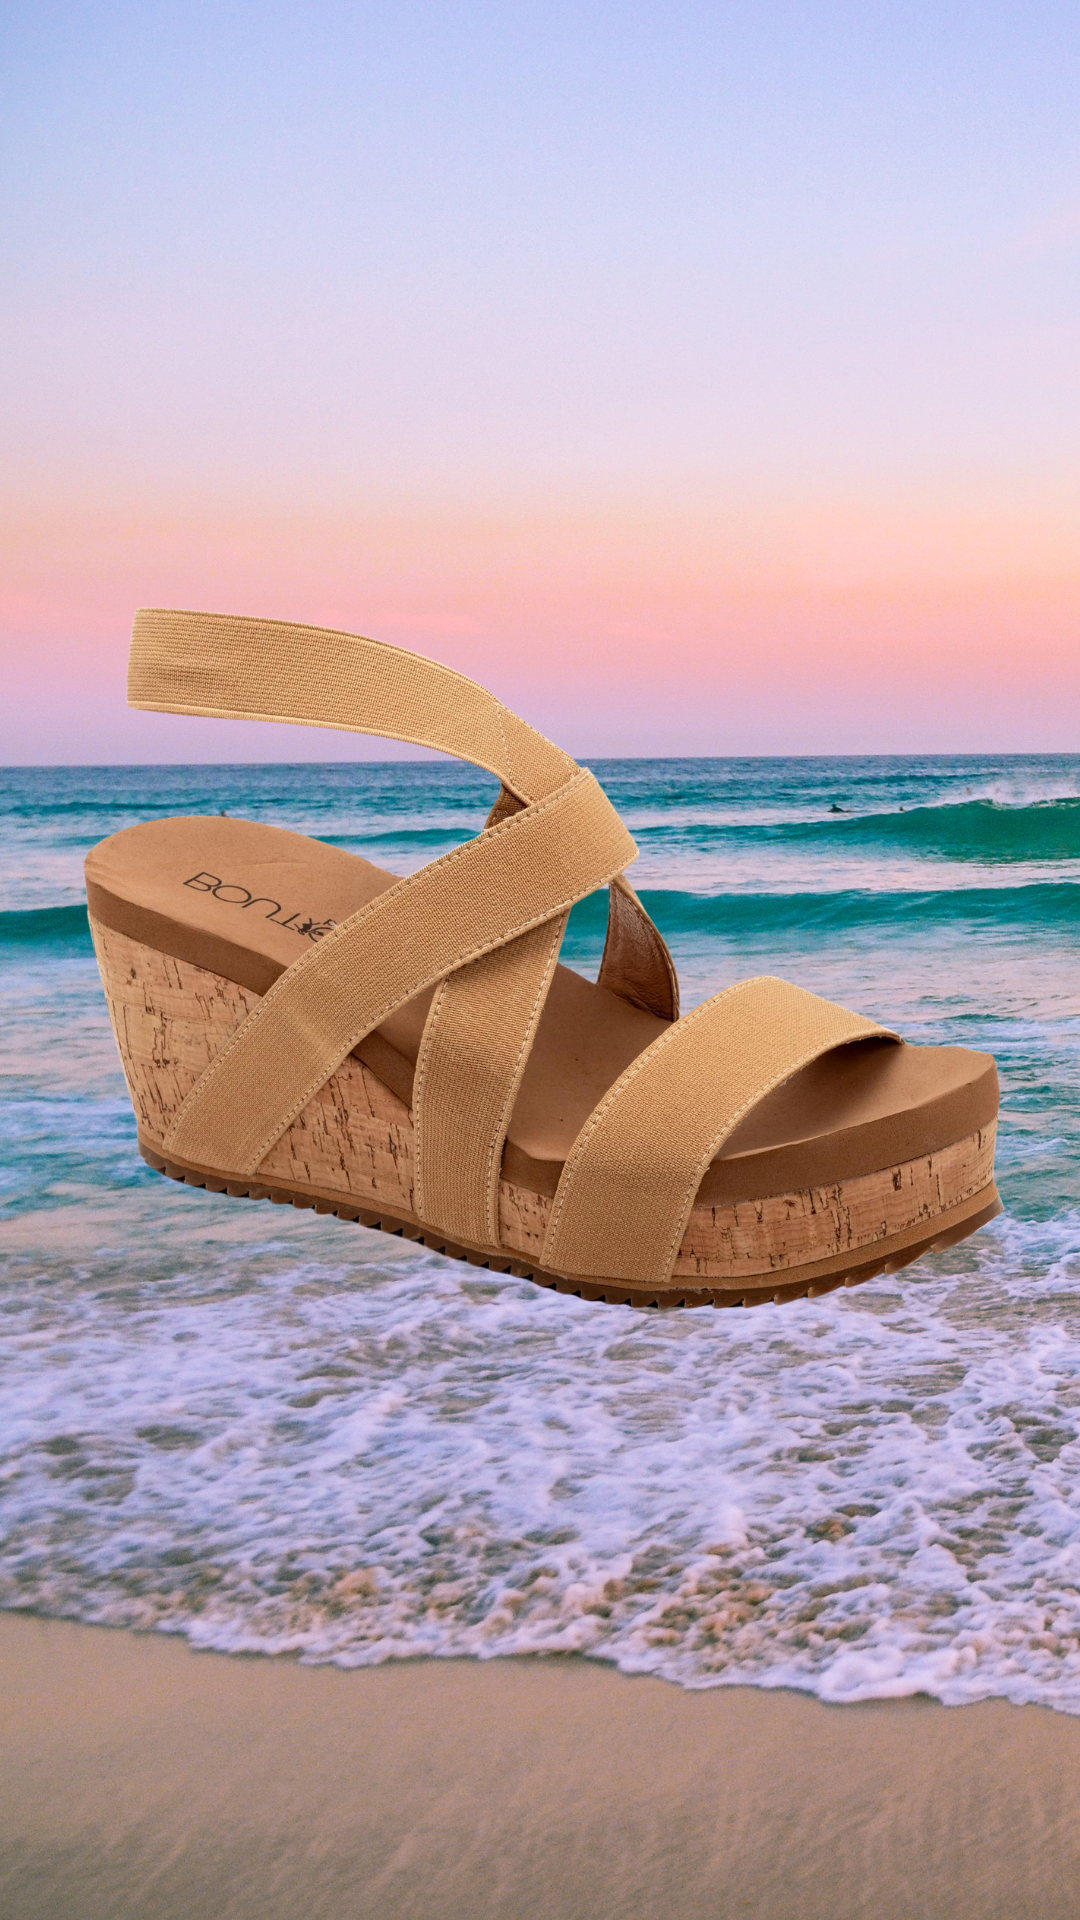 Market Live Preorder: Quirky Wedge by Corky’s (Ships in 2-3 Weeks)